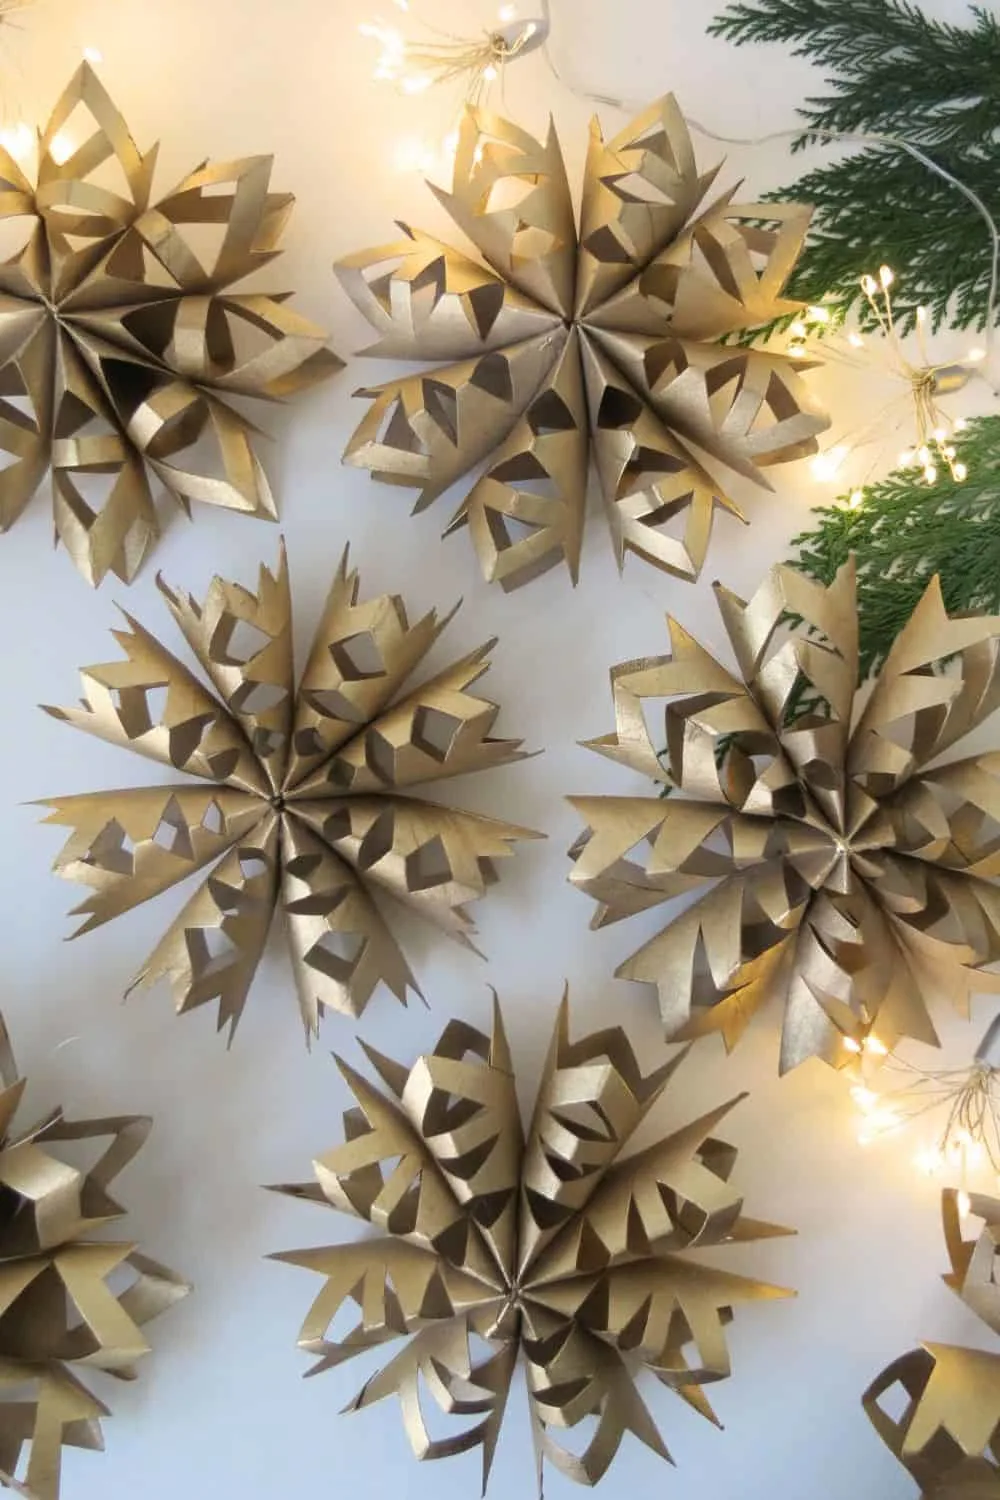 Easy to make toilet paper roll snowflake